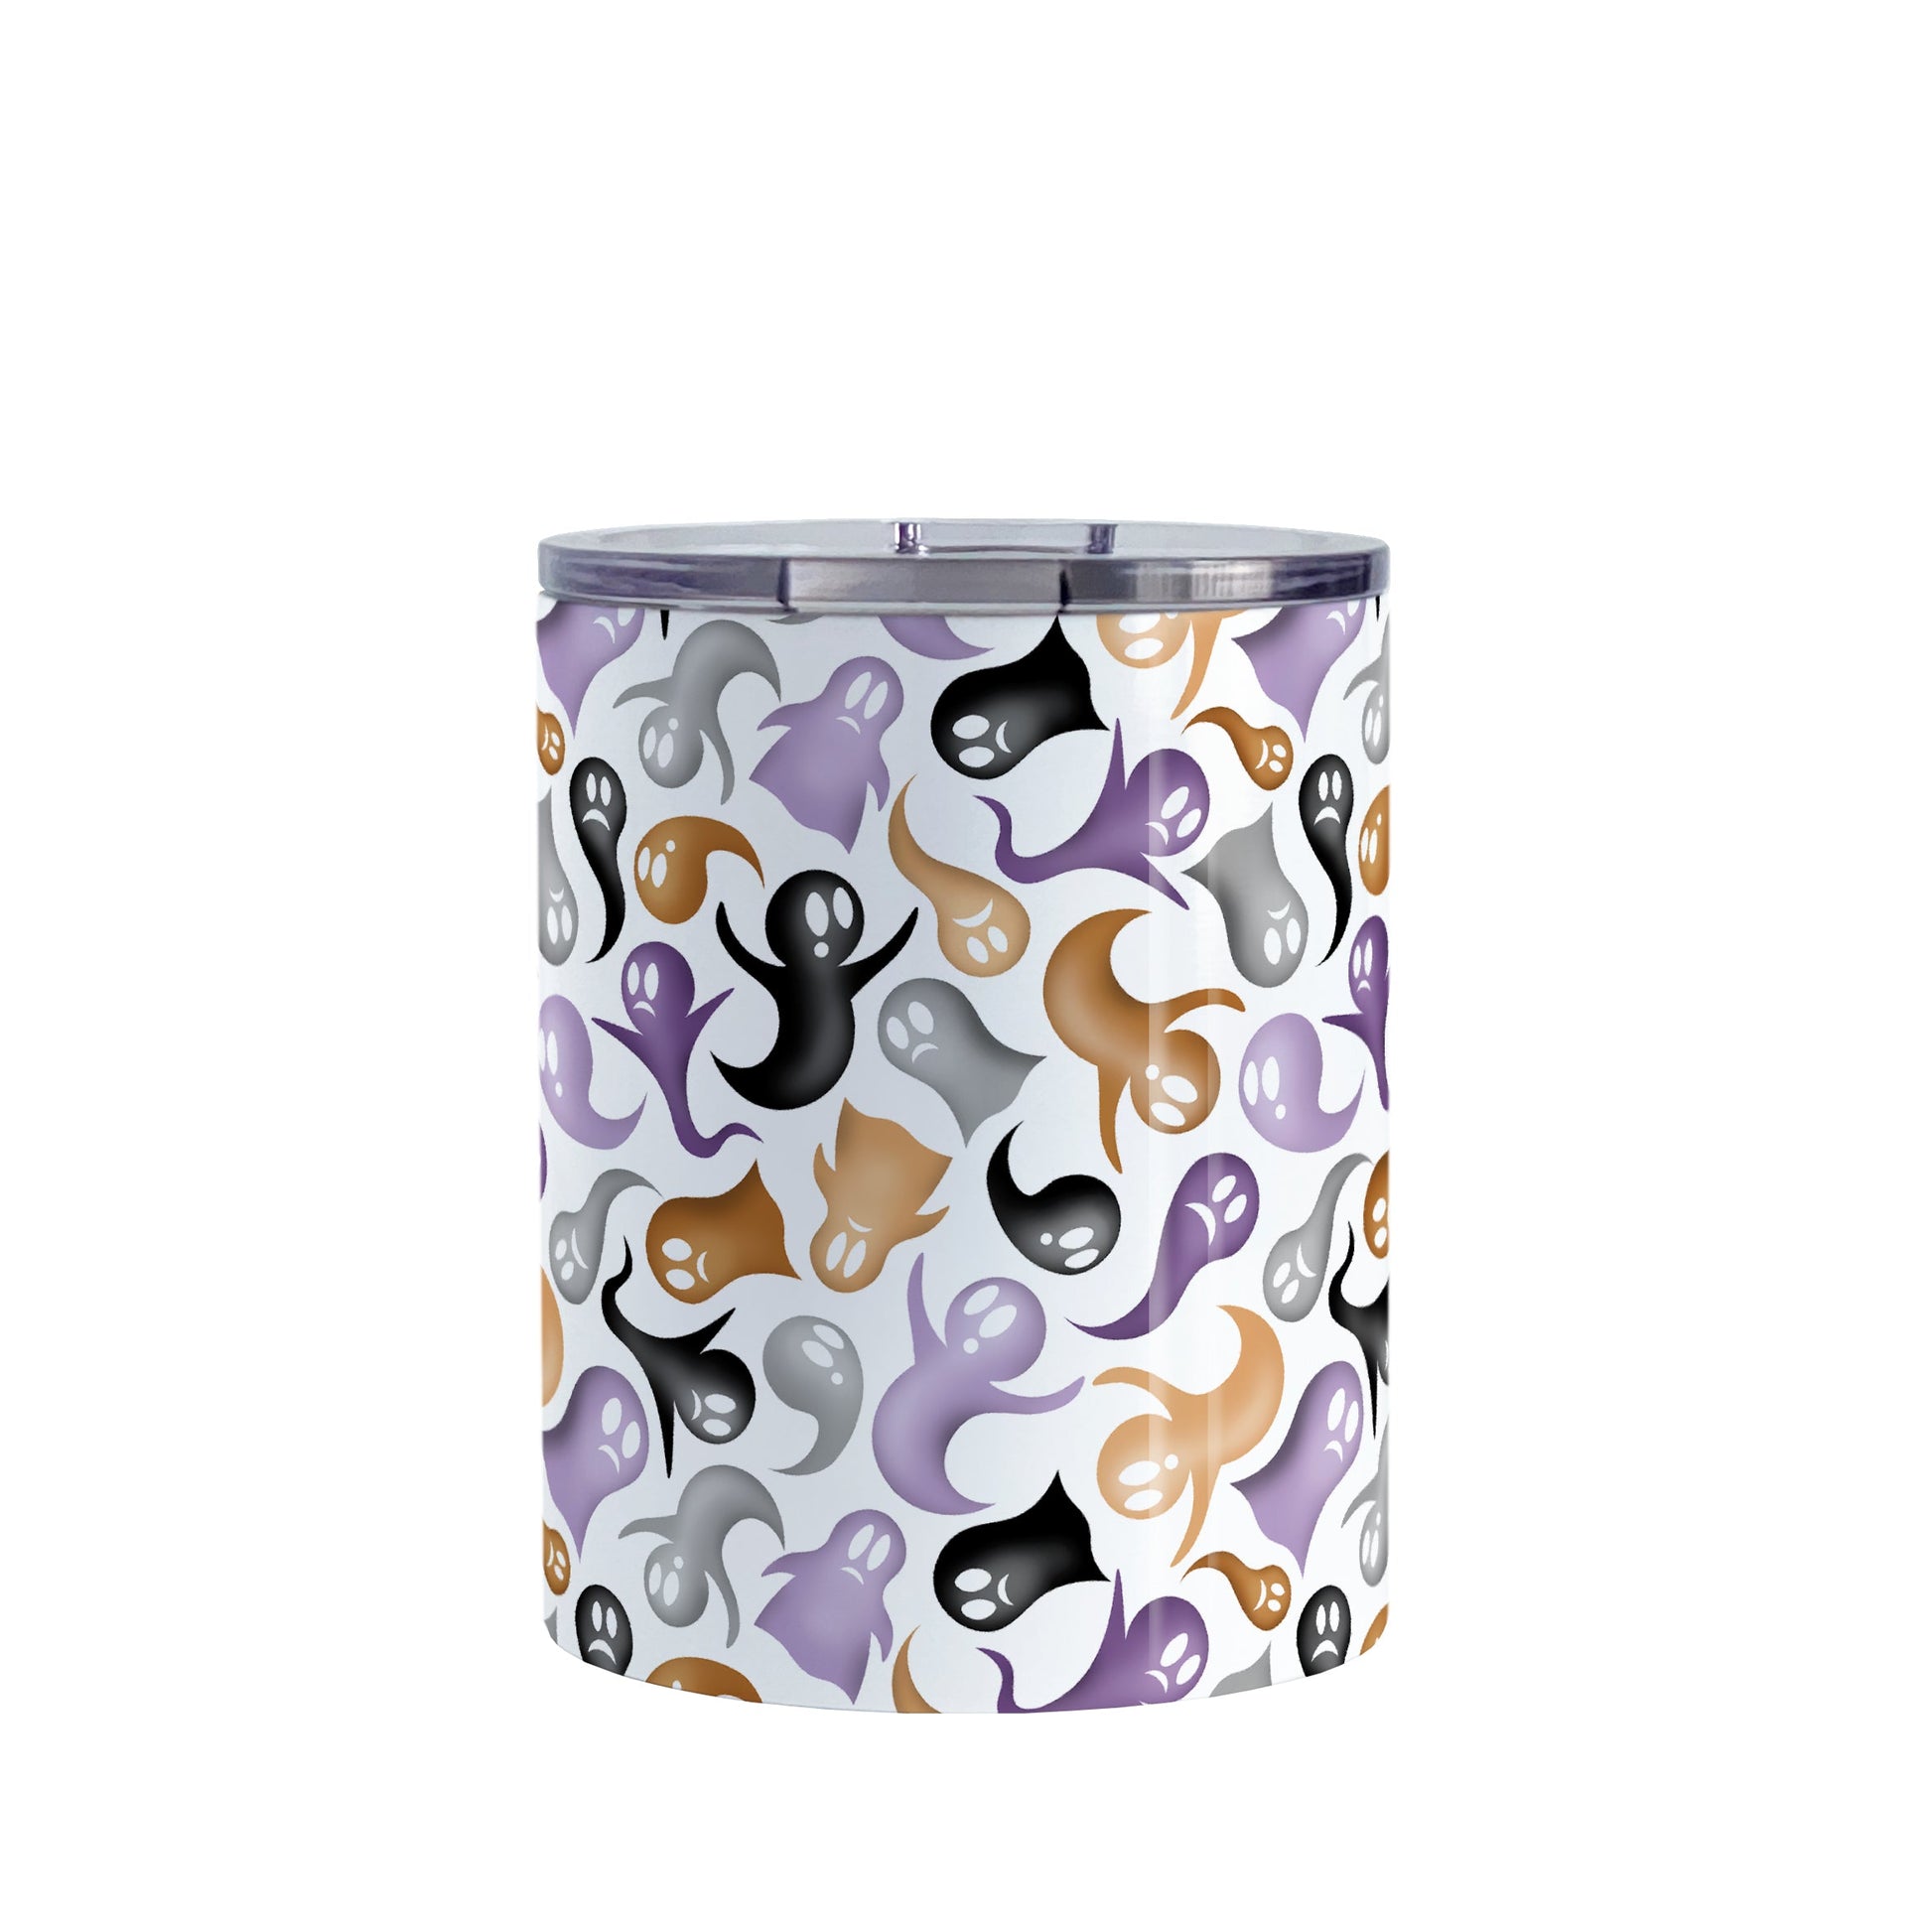 Ghosts and Spirits Halloween Tumbler Cup (10oz) at Amy's Coffee Mugs. A stainless steel insulated tumbler cup designed with a whimsical pattern of purple, orange, black and gray ghosts and spirits that wraps around the cup. 